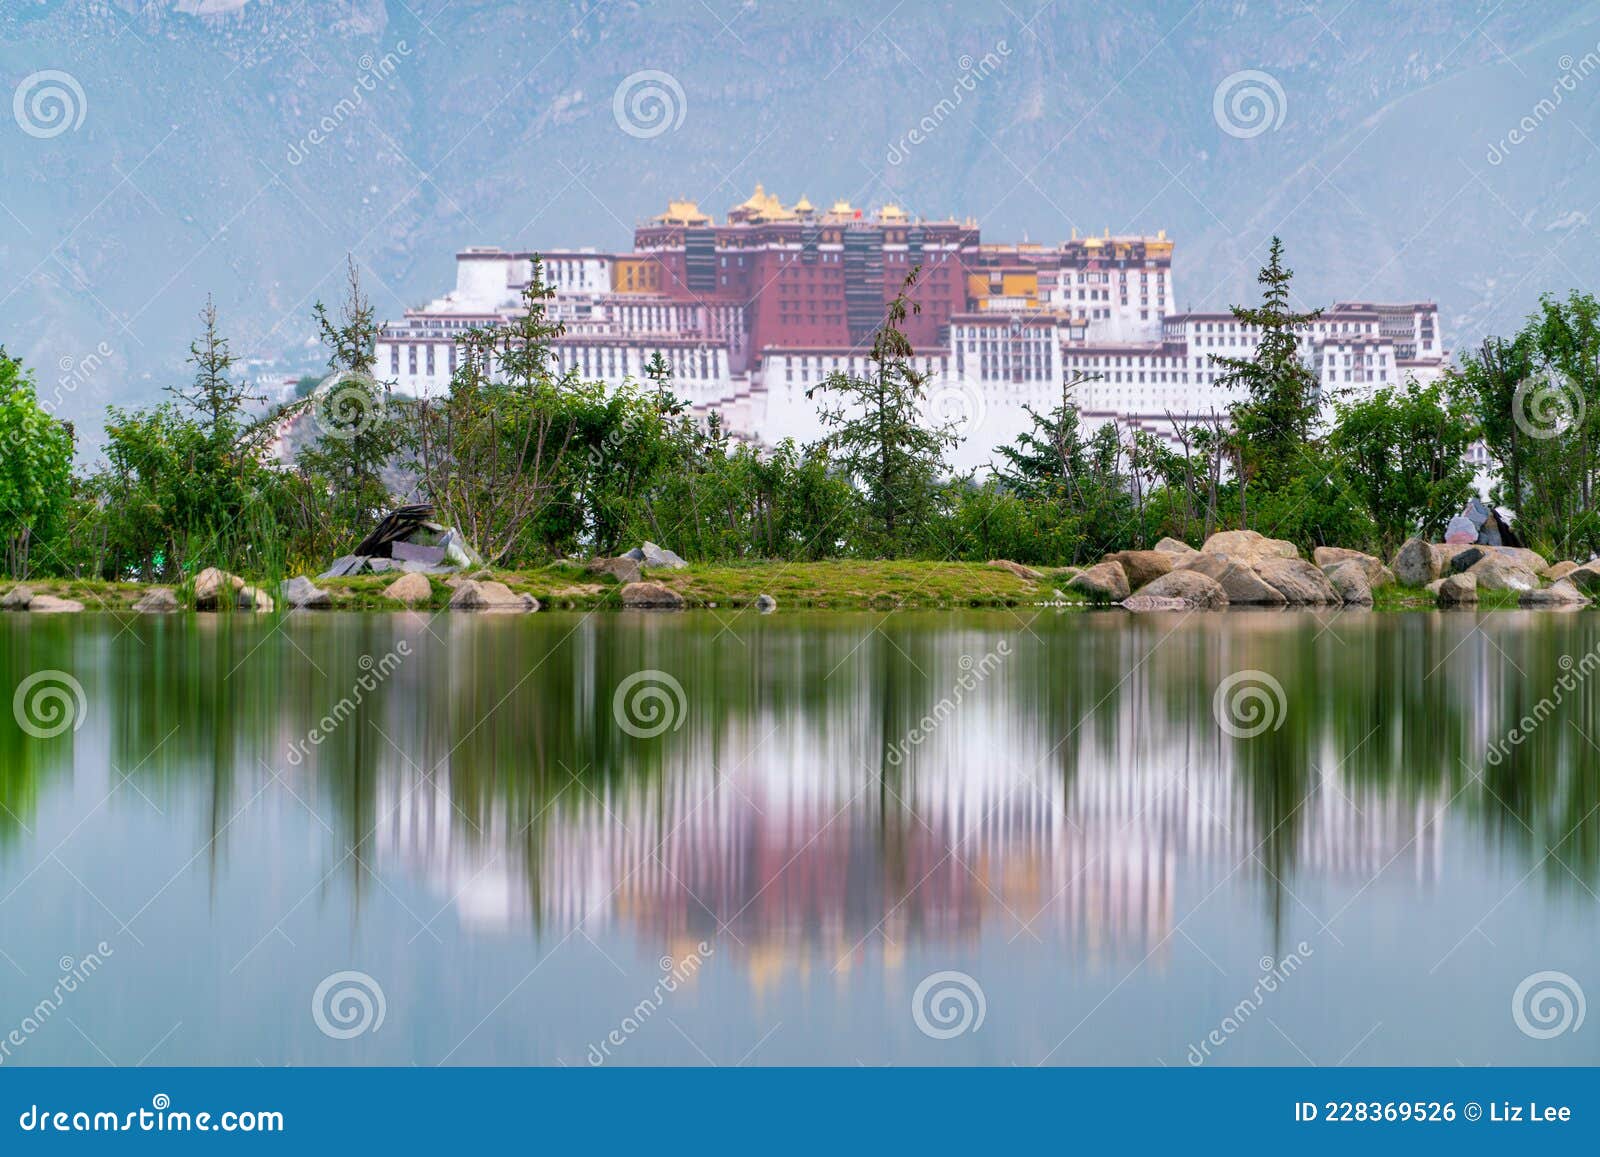 the potala palace, the holy place of tibetan buddhism